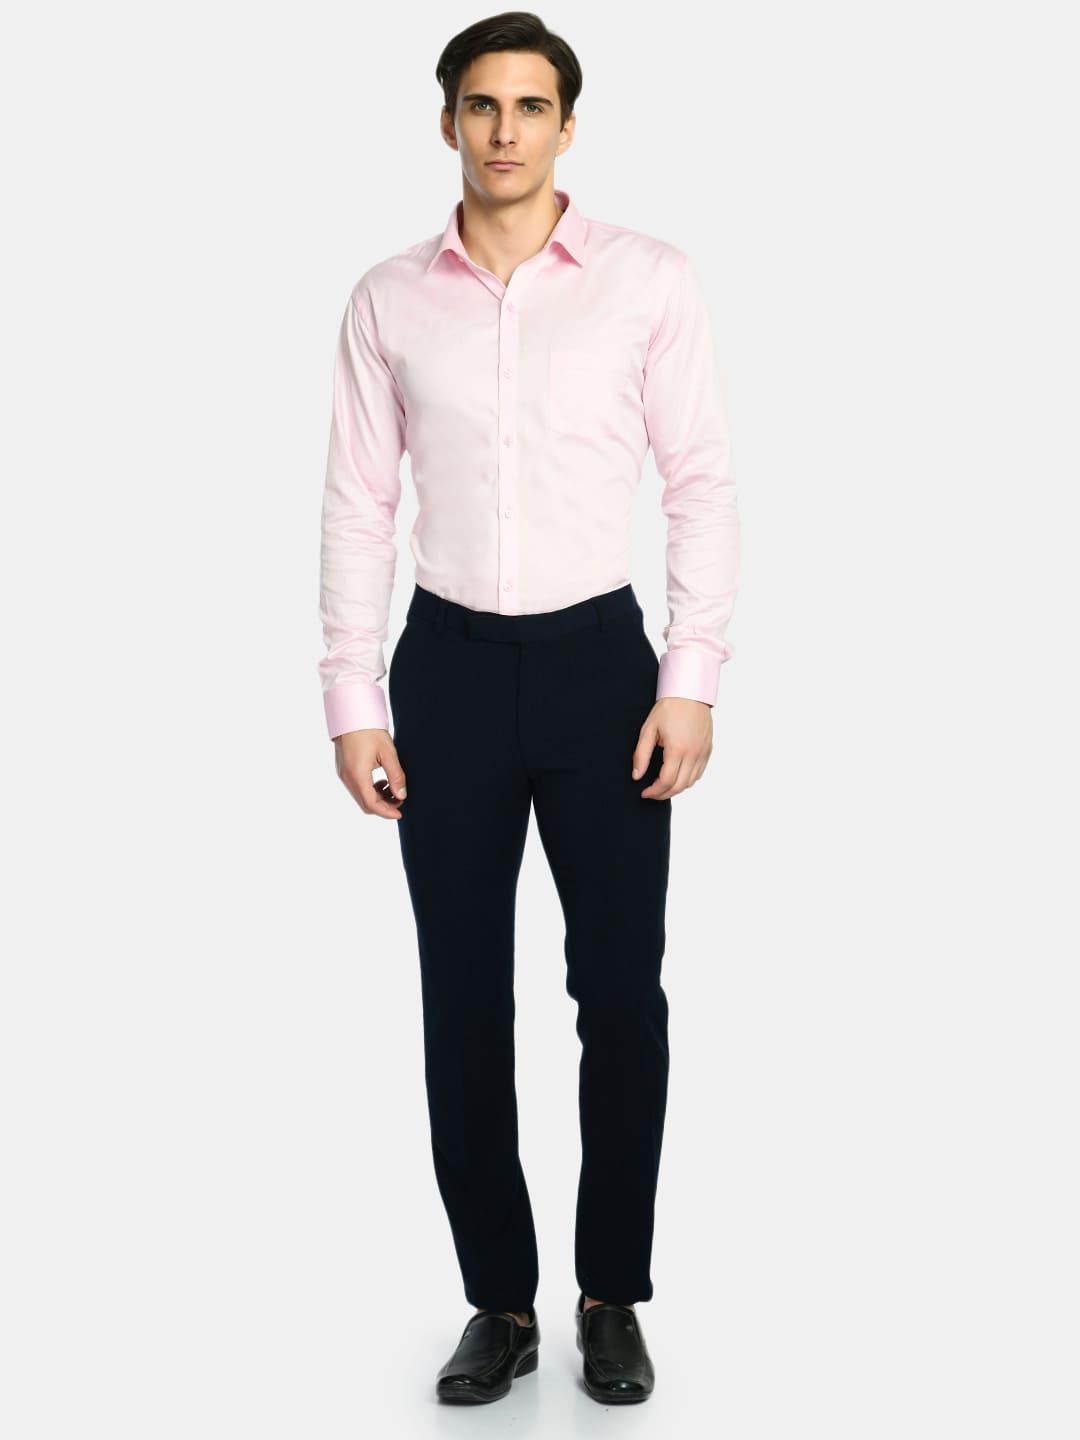 Solid Pink Spread Collar Formal Shirt with Curved Hemline